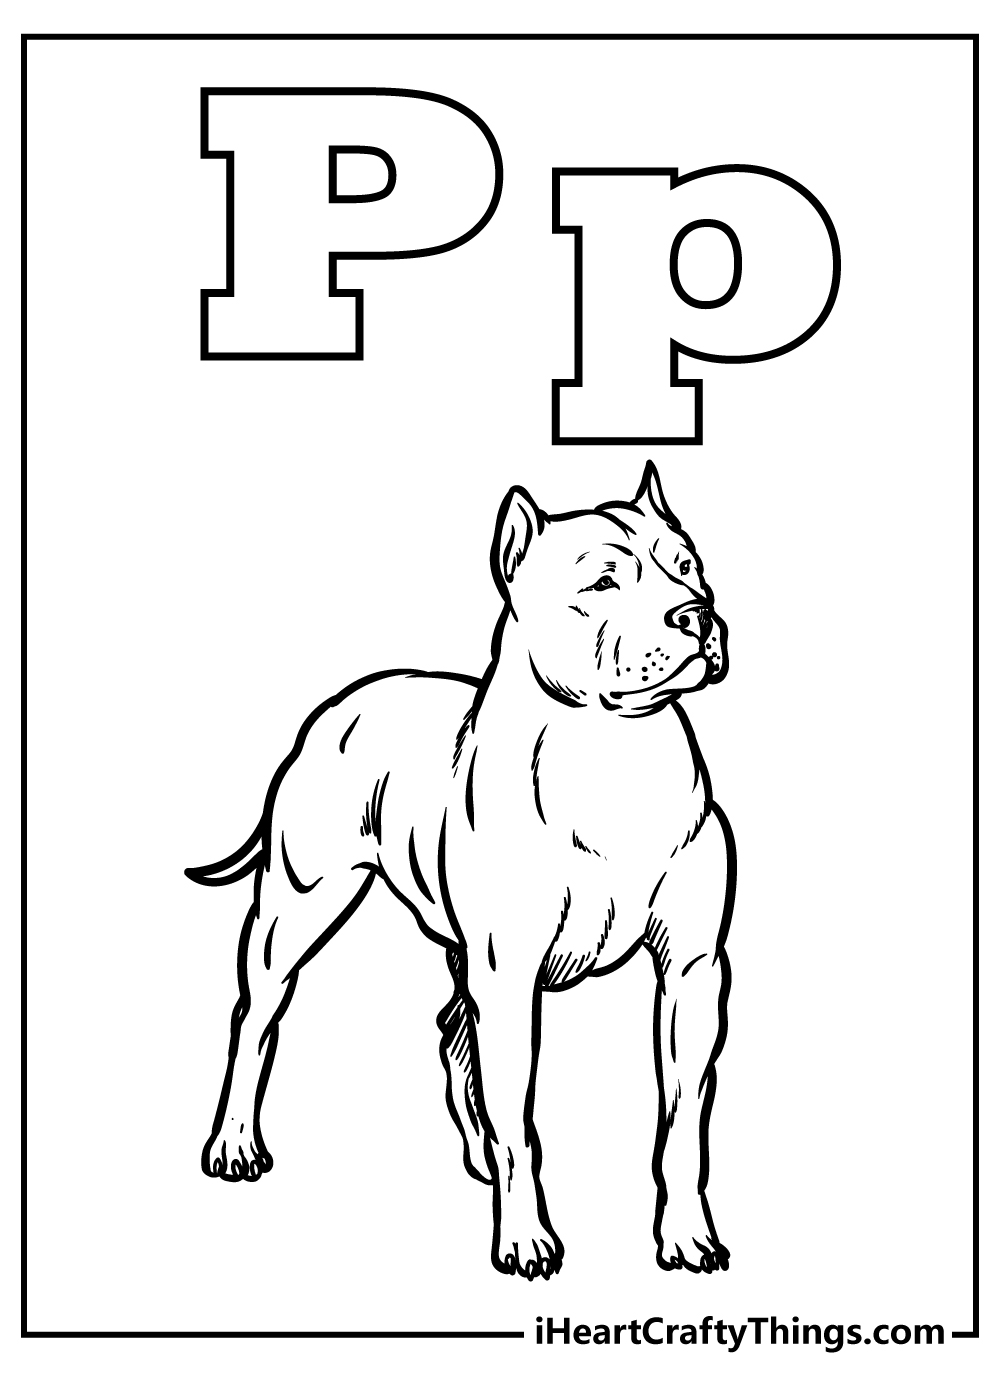 Letter P Coloring Pages for kids free download